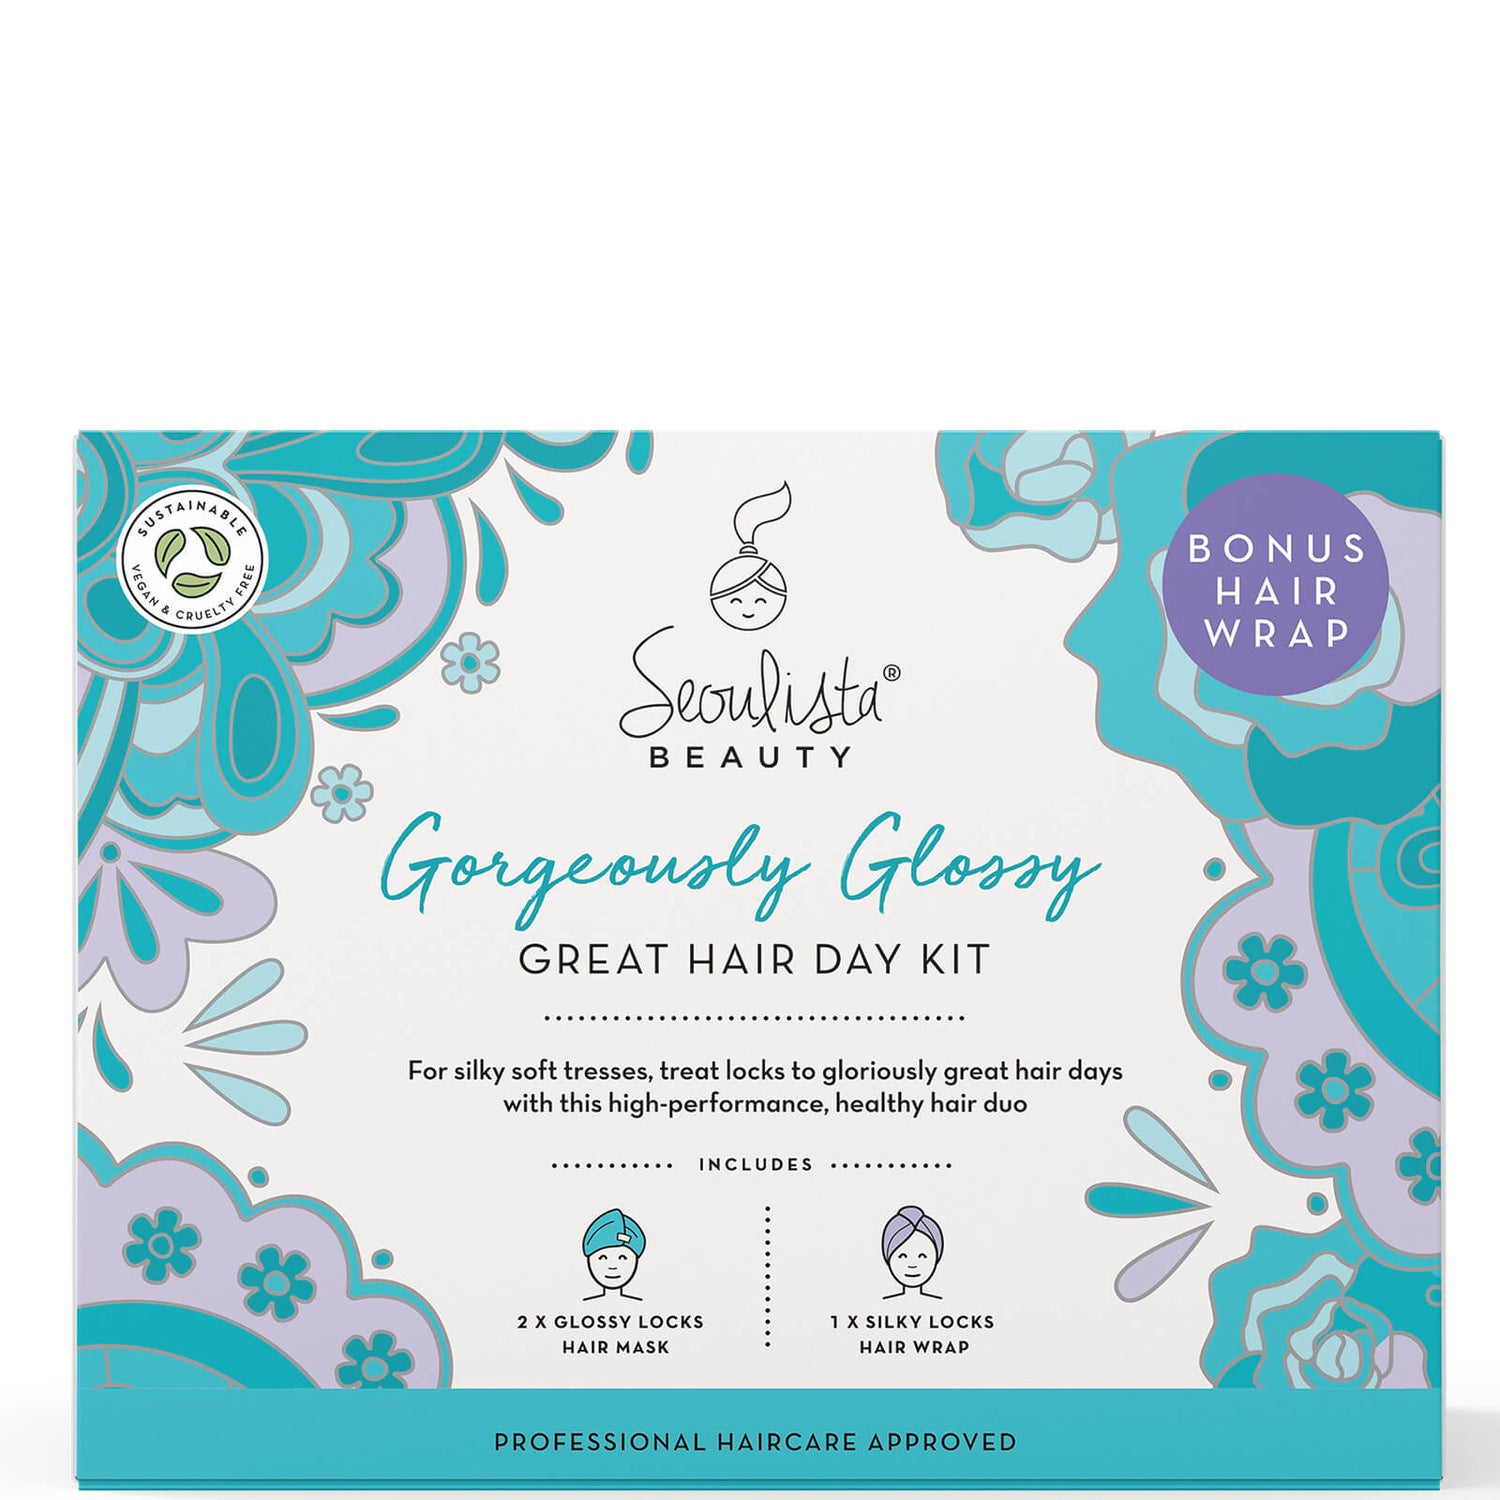 Seoulista Beauty Gorgeously Glossy Great Hair Day Kit